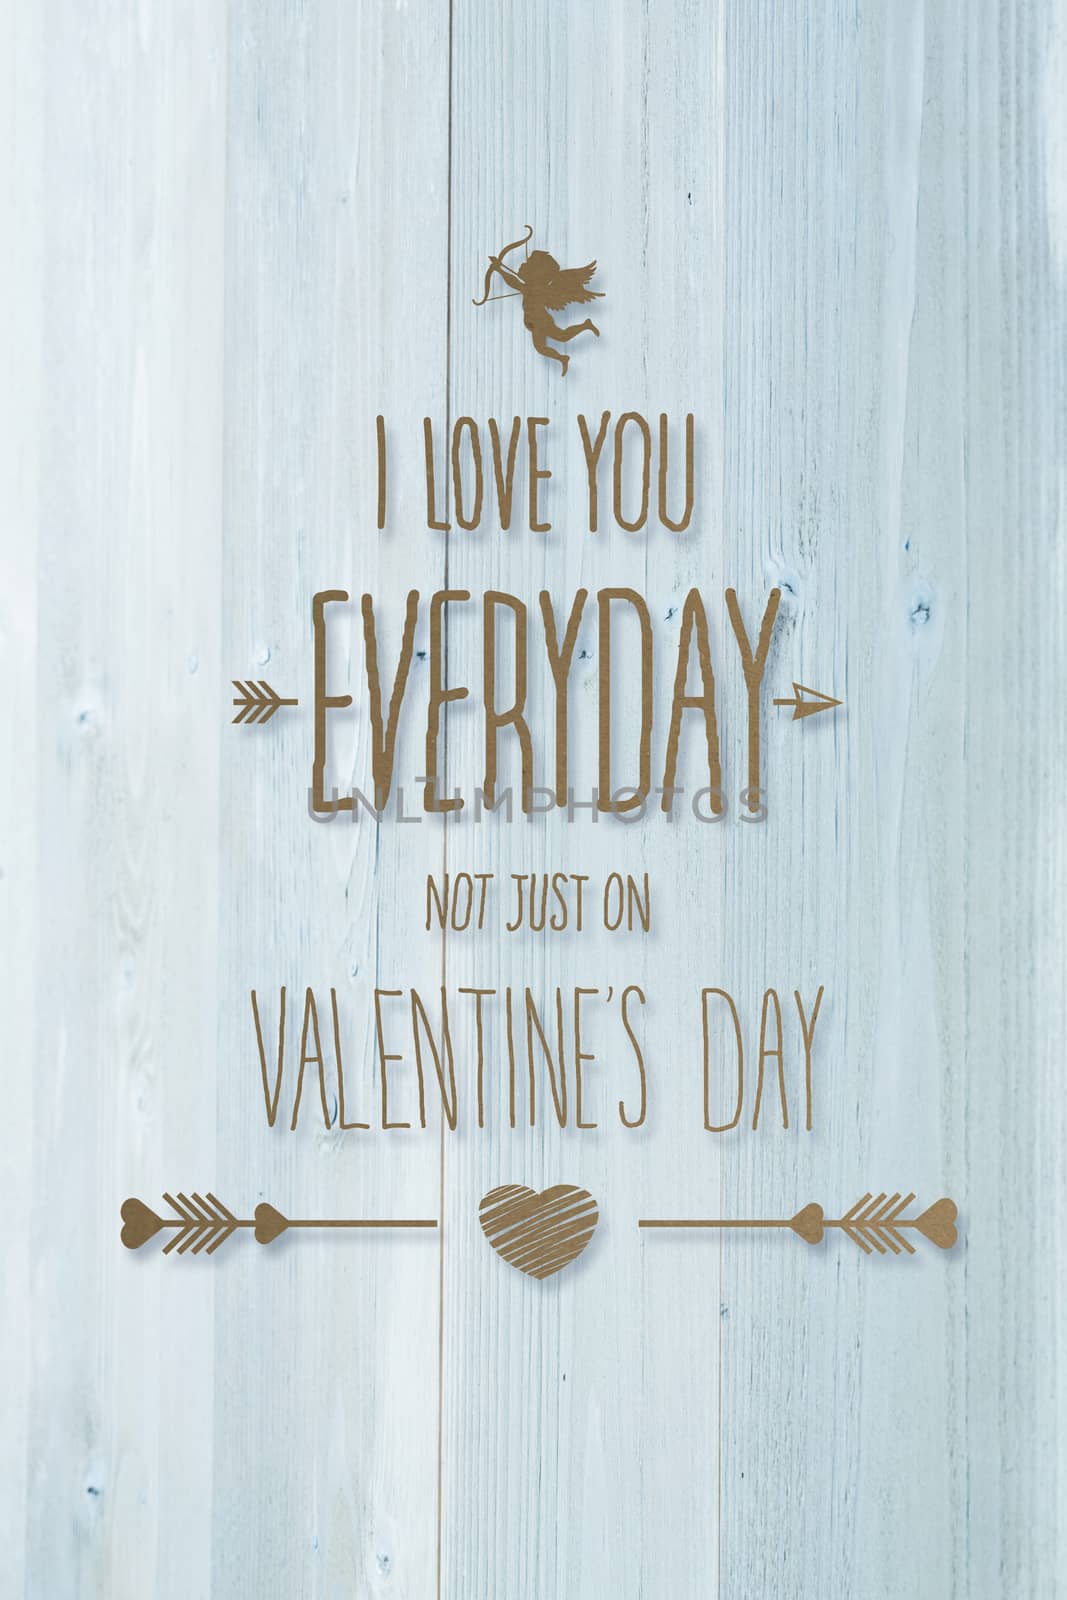 Valentines day greeting against bleached wooden planks background